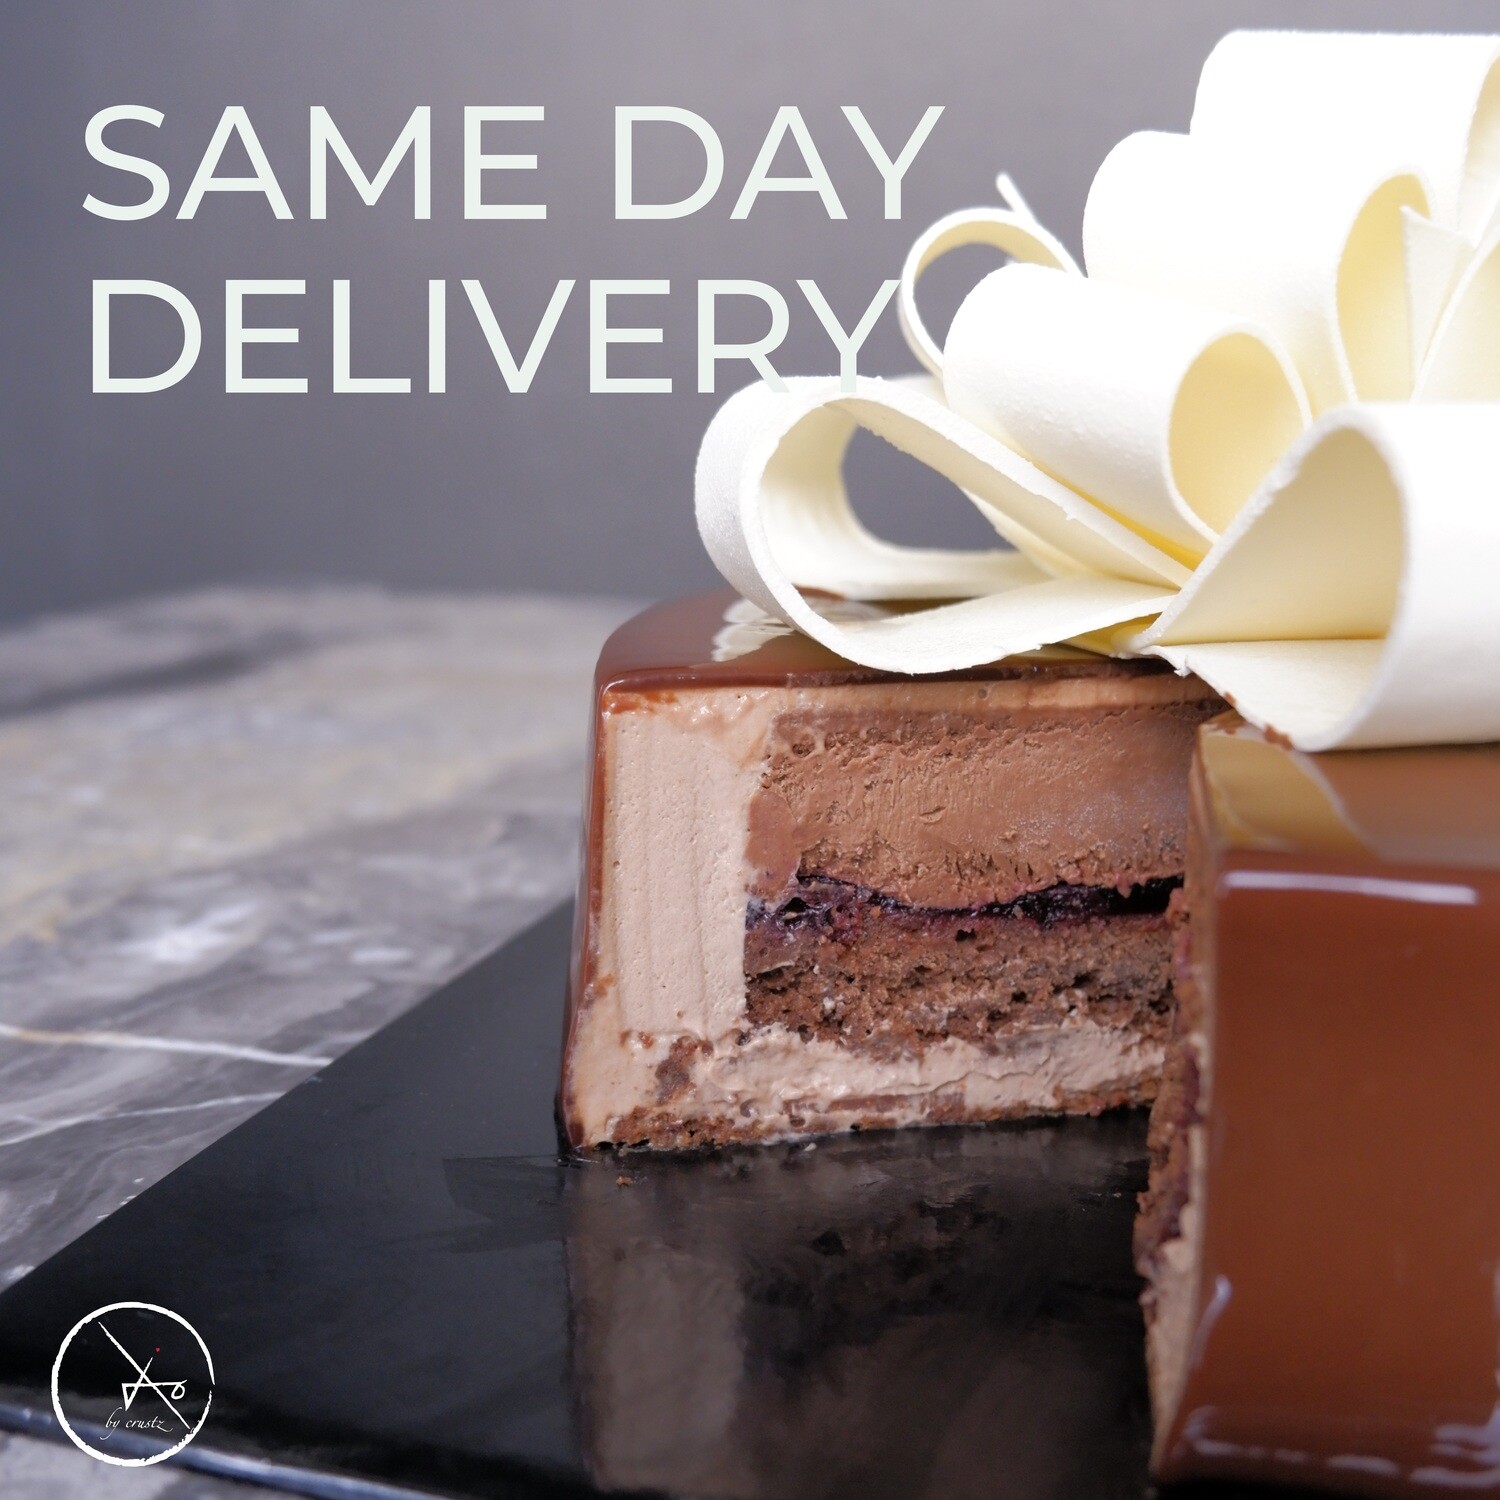 SAME DAY DELIVERY - CAKES